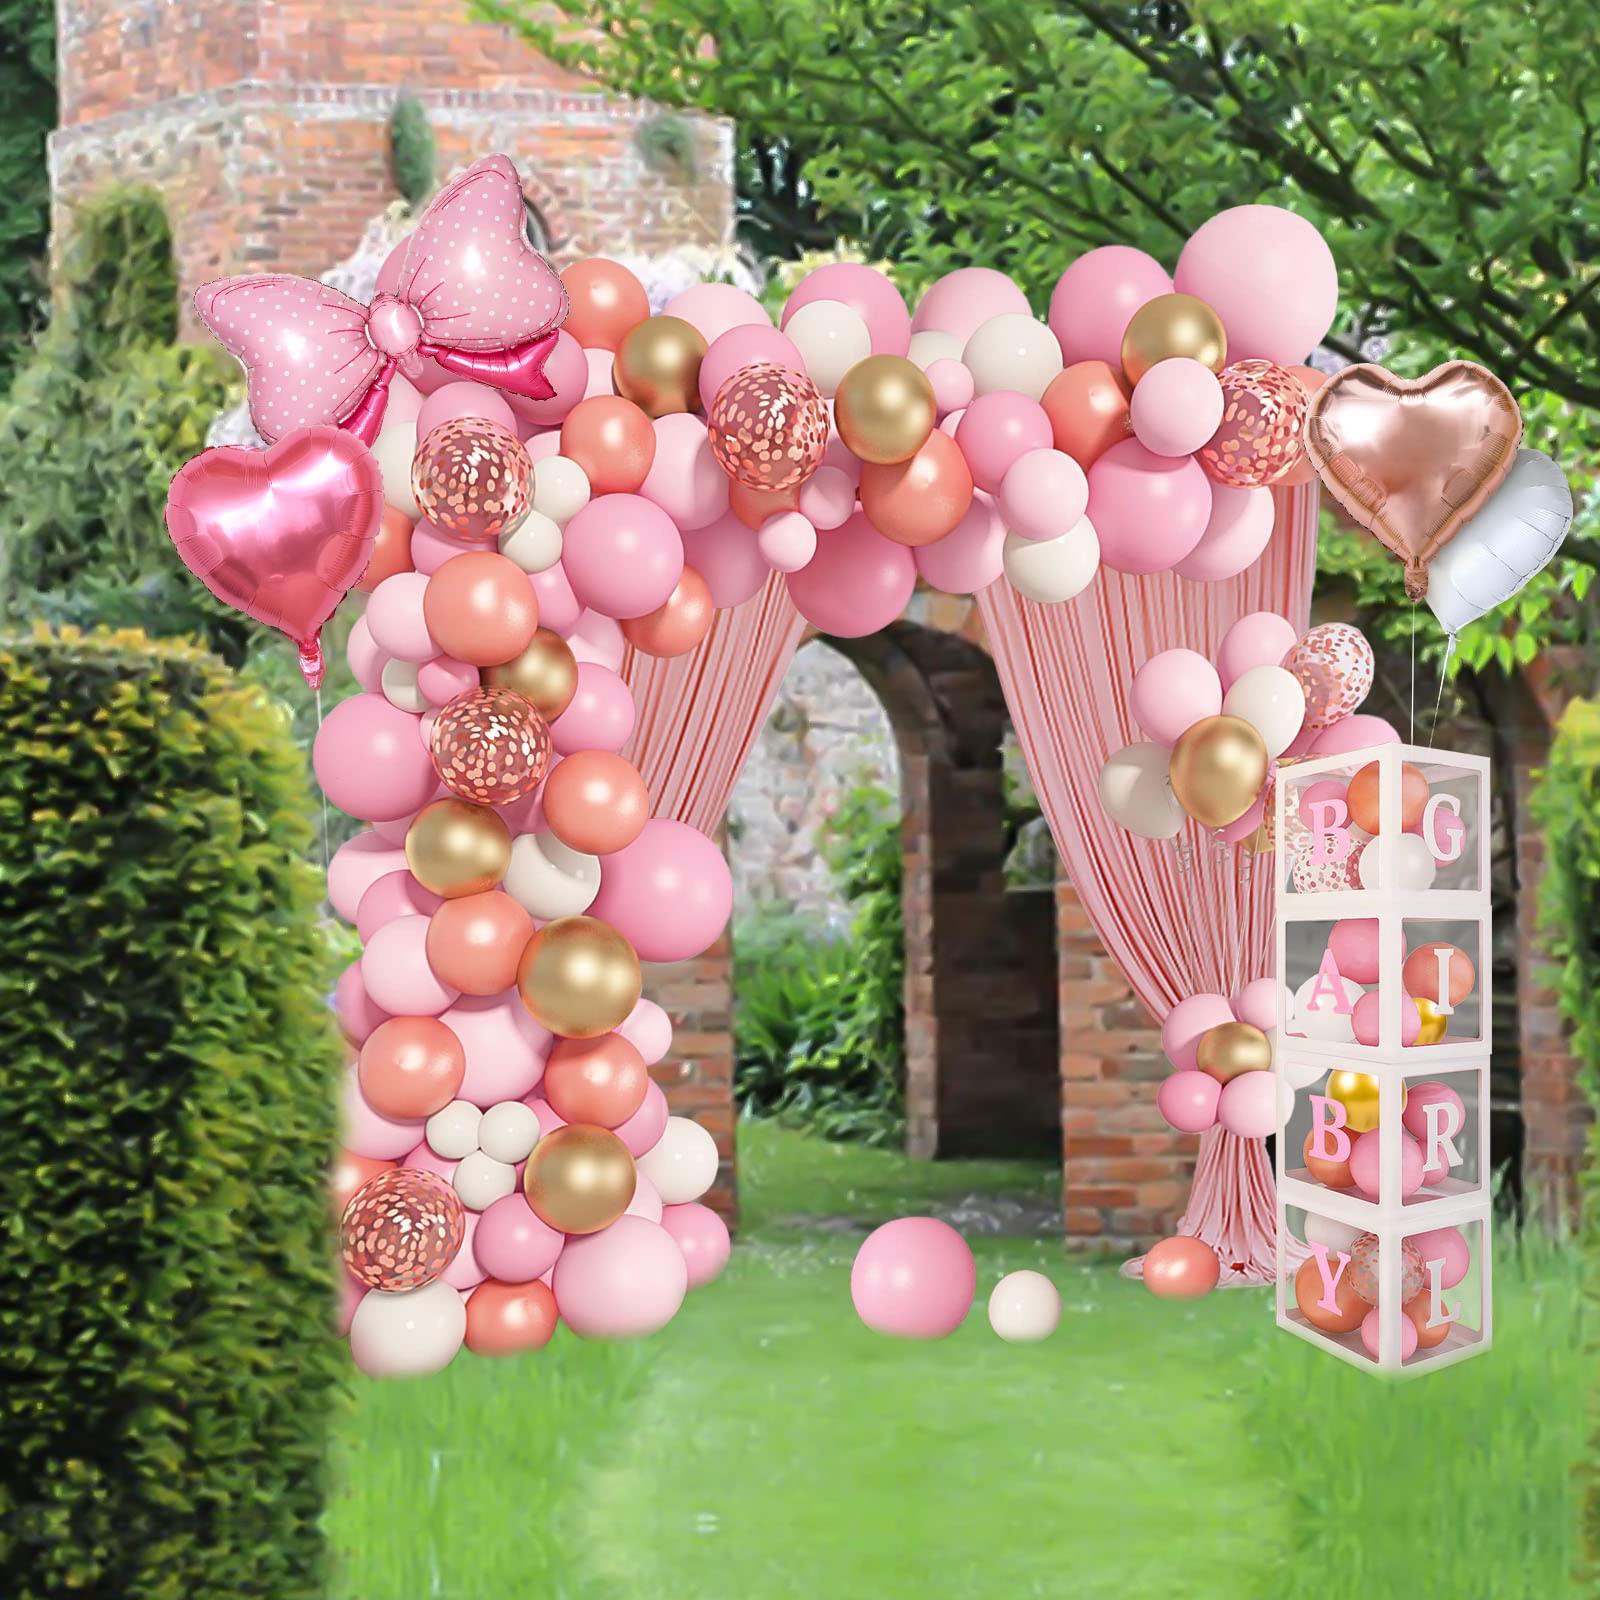 Winrayk 145Pcs Baby Shower Decorations for Girl Baby Boxes with Letters (Baby Girl+A-Z) & Rose Gold Pink Balloon Arch & Backdrop Tablecloth & Bowtie Heart Balloon Princess Girl Baby Shower Decorations